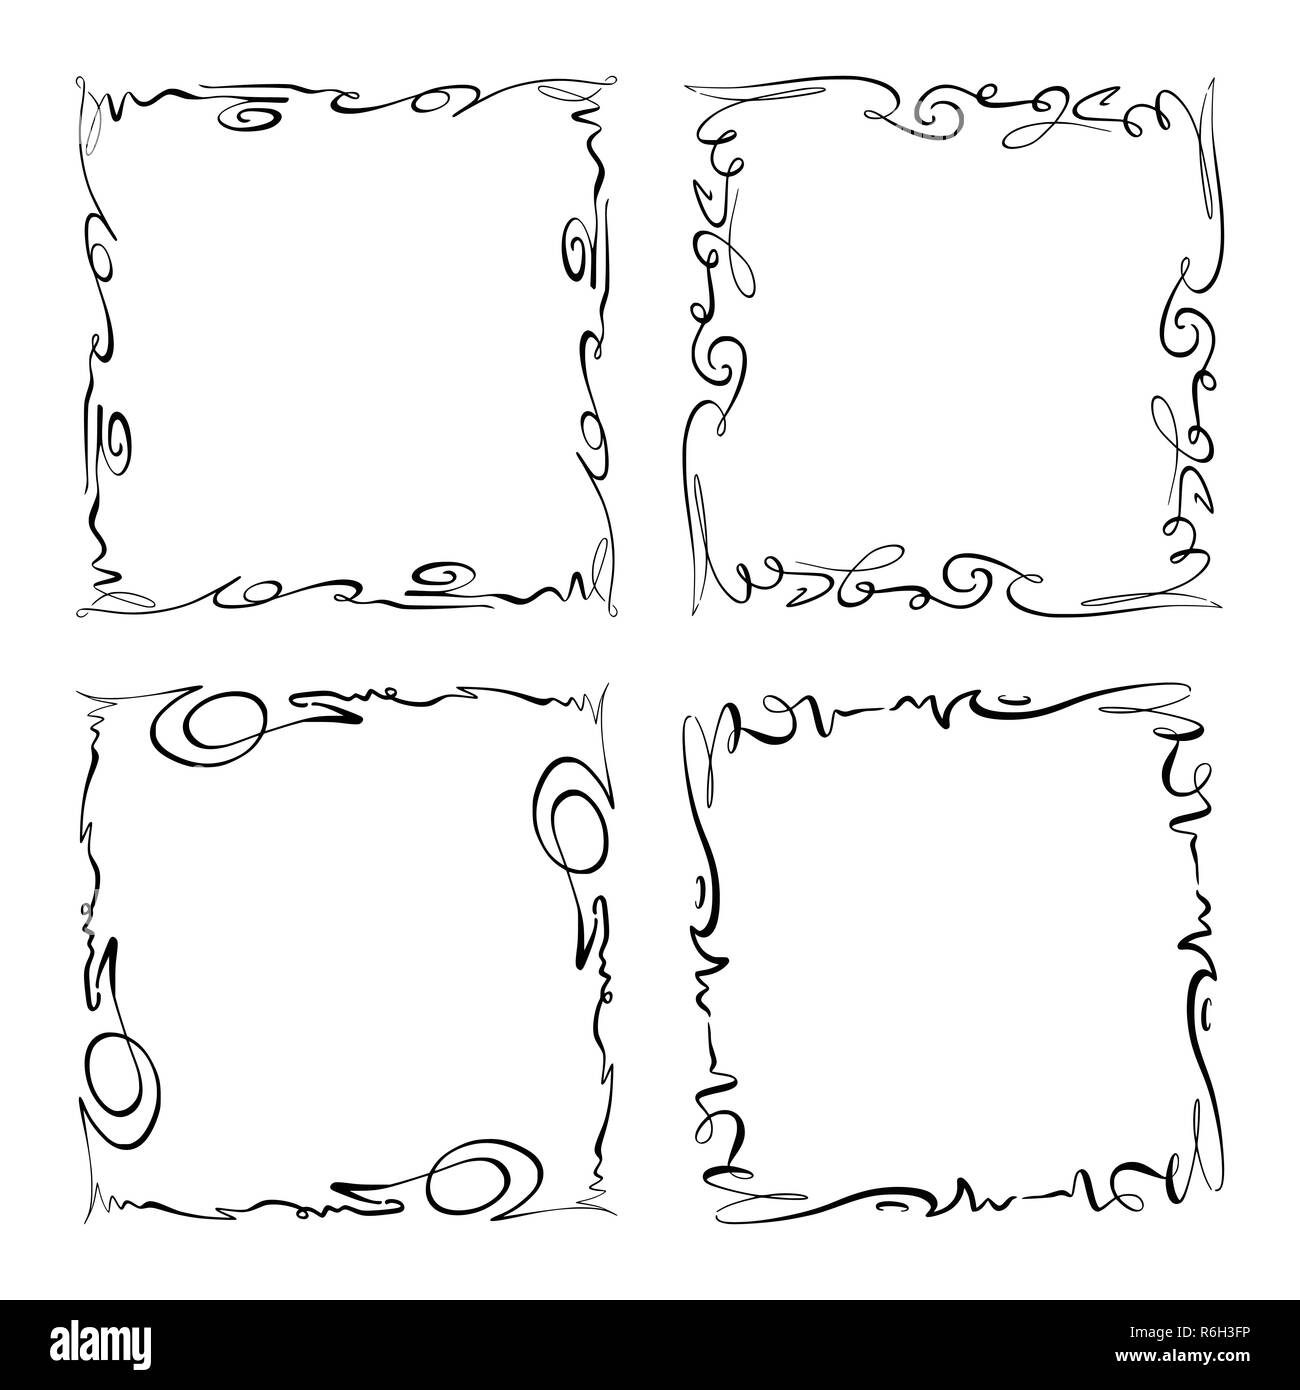 Simple Page Border Designs To Draw - Designs Borders To Draw Transparent  PNG - 640x480 - Free Download on NicePNG